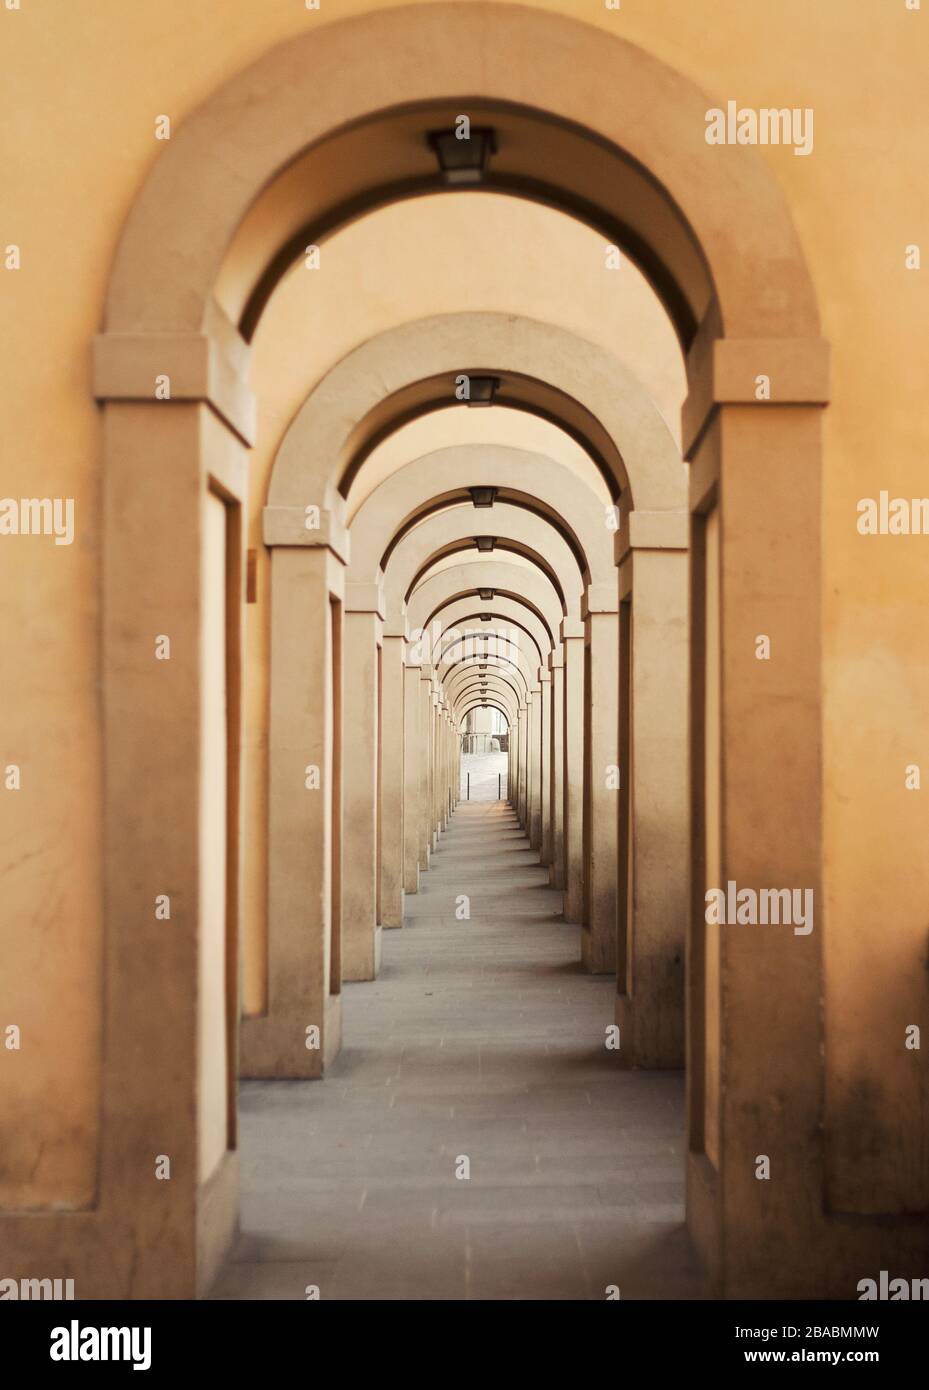 Arches of the Vasari Corridor connecting Palazzo Vecchio to the Pitti Palace in Florence, Tuscany, Italy - segment between Uffizi and Ponte Vecchio Stock Photo